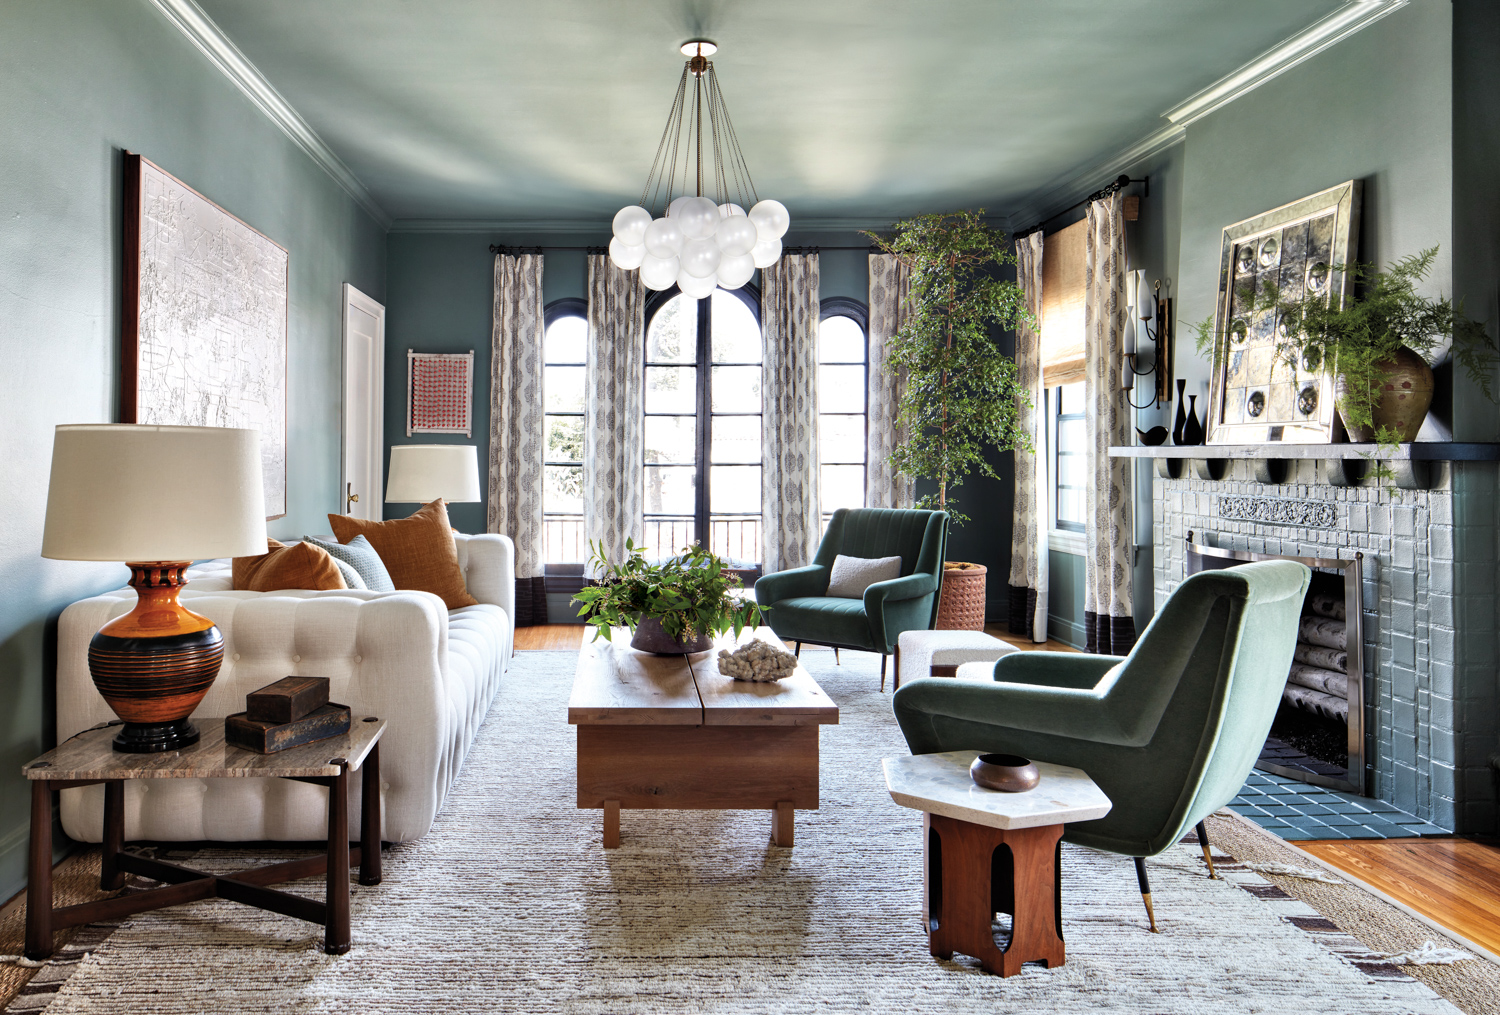 A living room with soft green walls, two green armchairs, a white sofa and a cloud-shaped chandelier